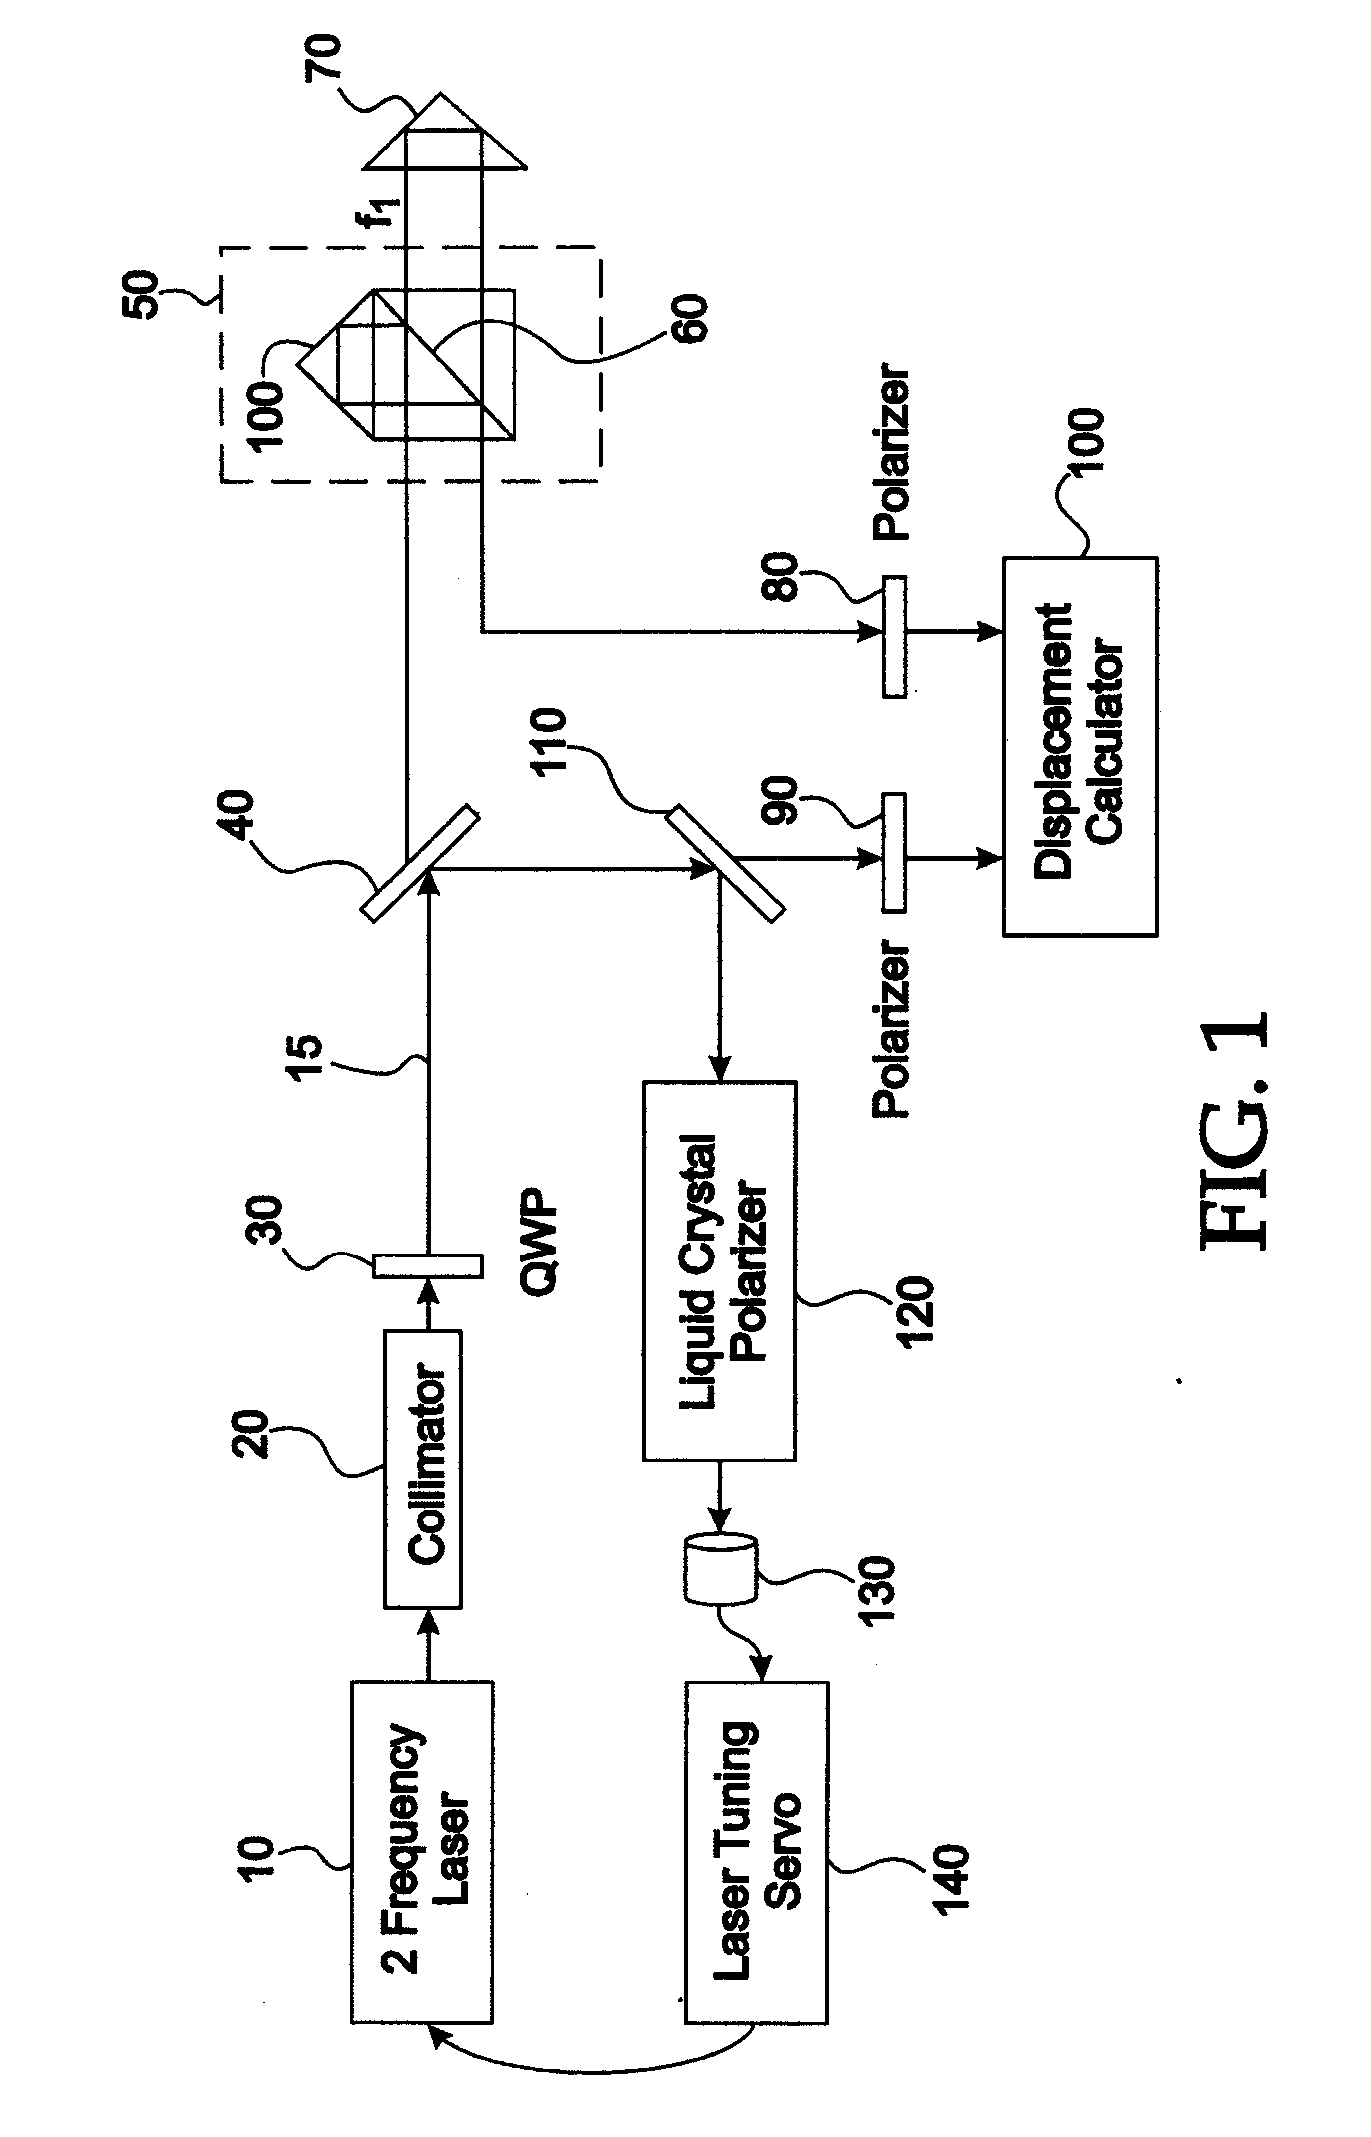 Lens correction element, system and method